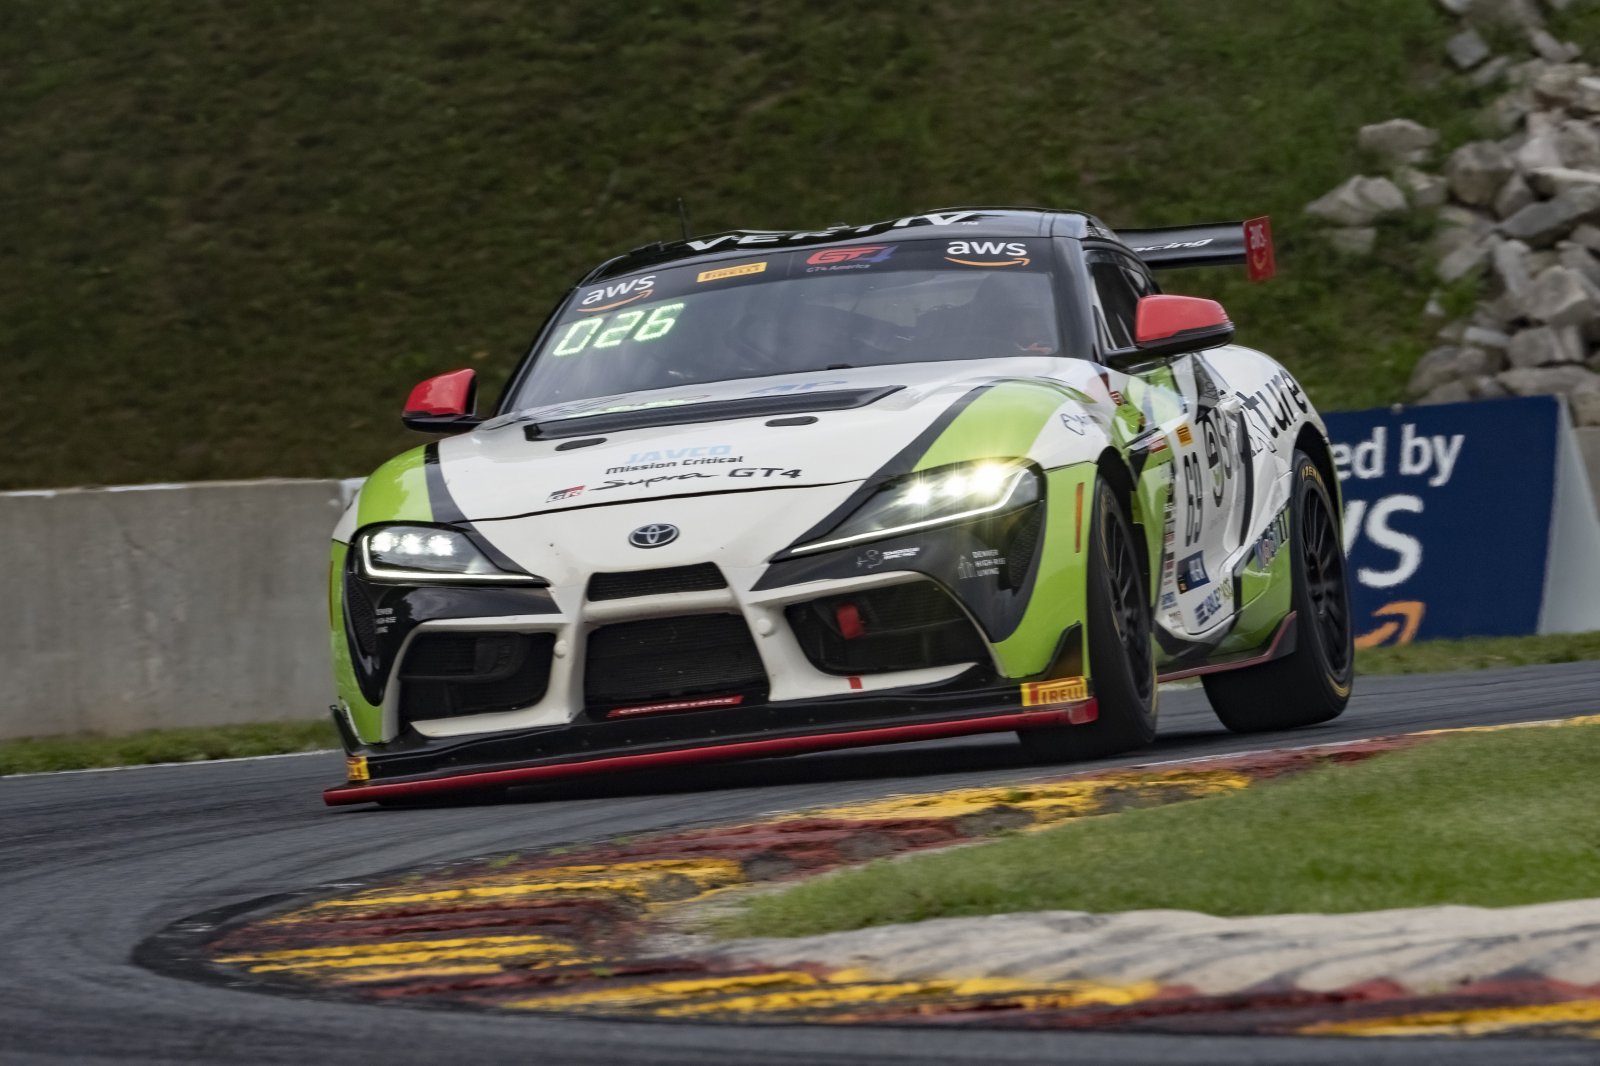 Telitz Quickest Overall in the Second Practice Session at Road America; McAleer and Borcheller first in Pro-Am and Am classes